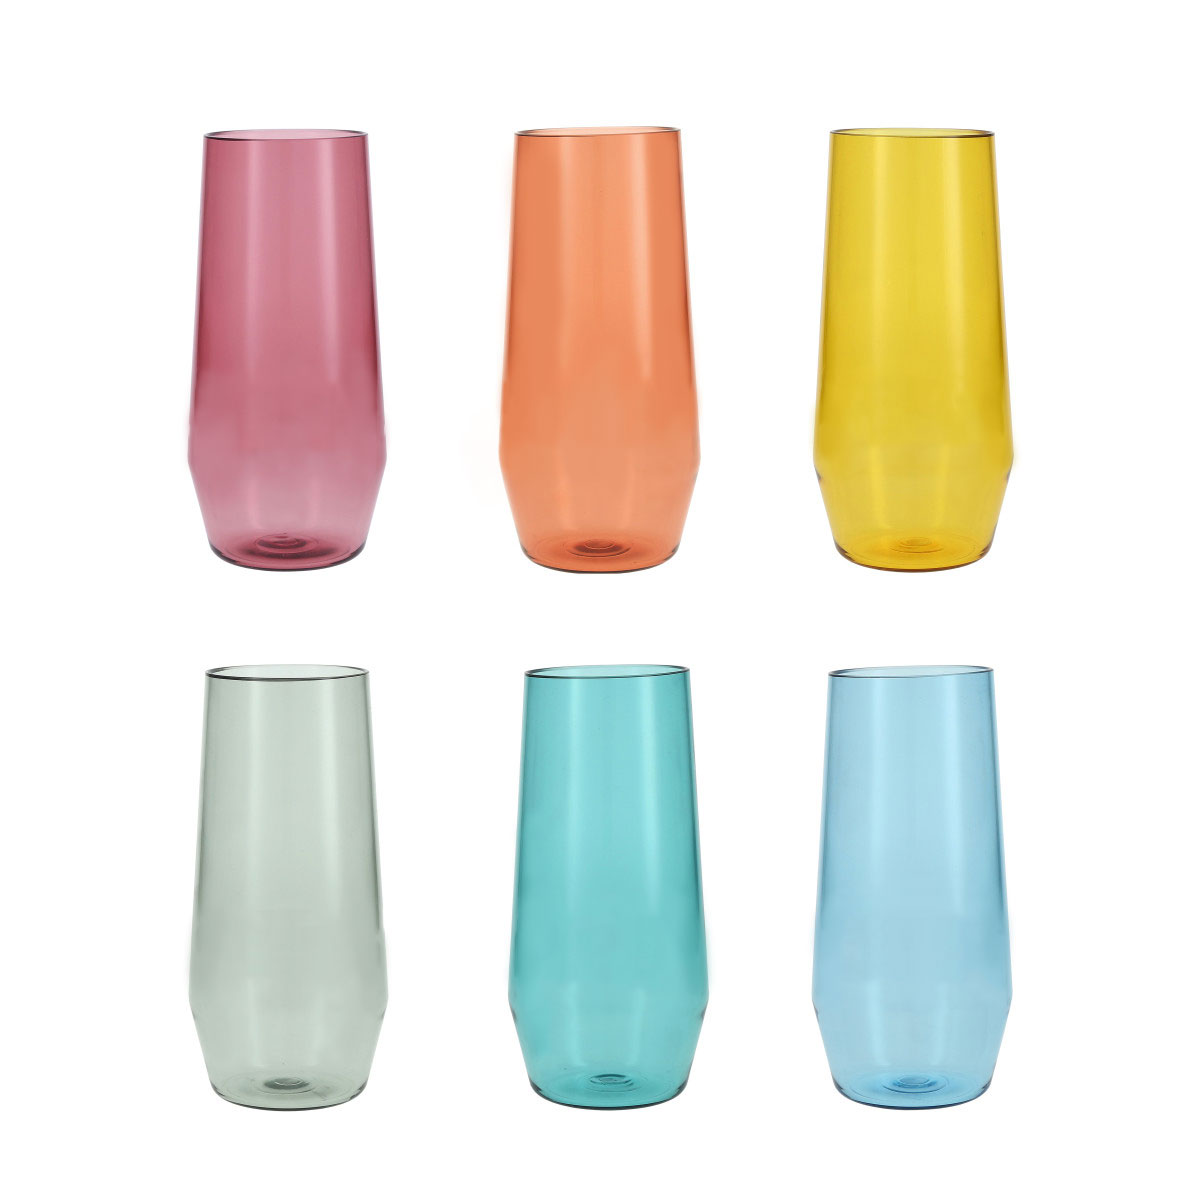 Fortessa Copolyester Glass Sole Iced Tea 18oz, Assorted Colors - Set of 6